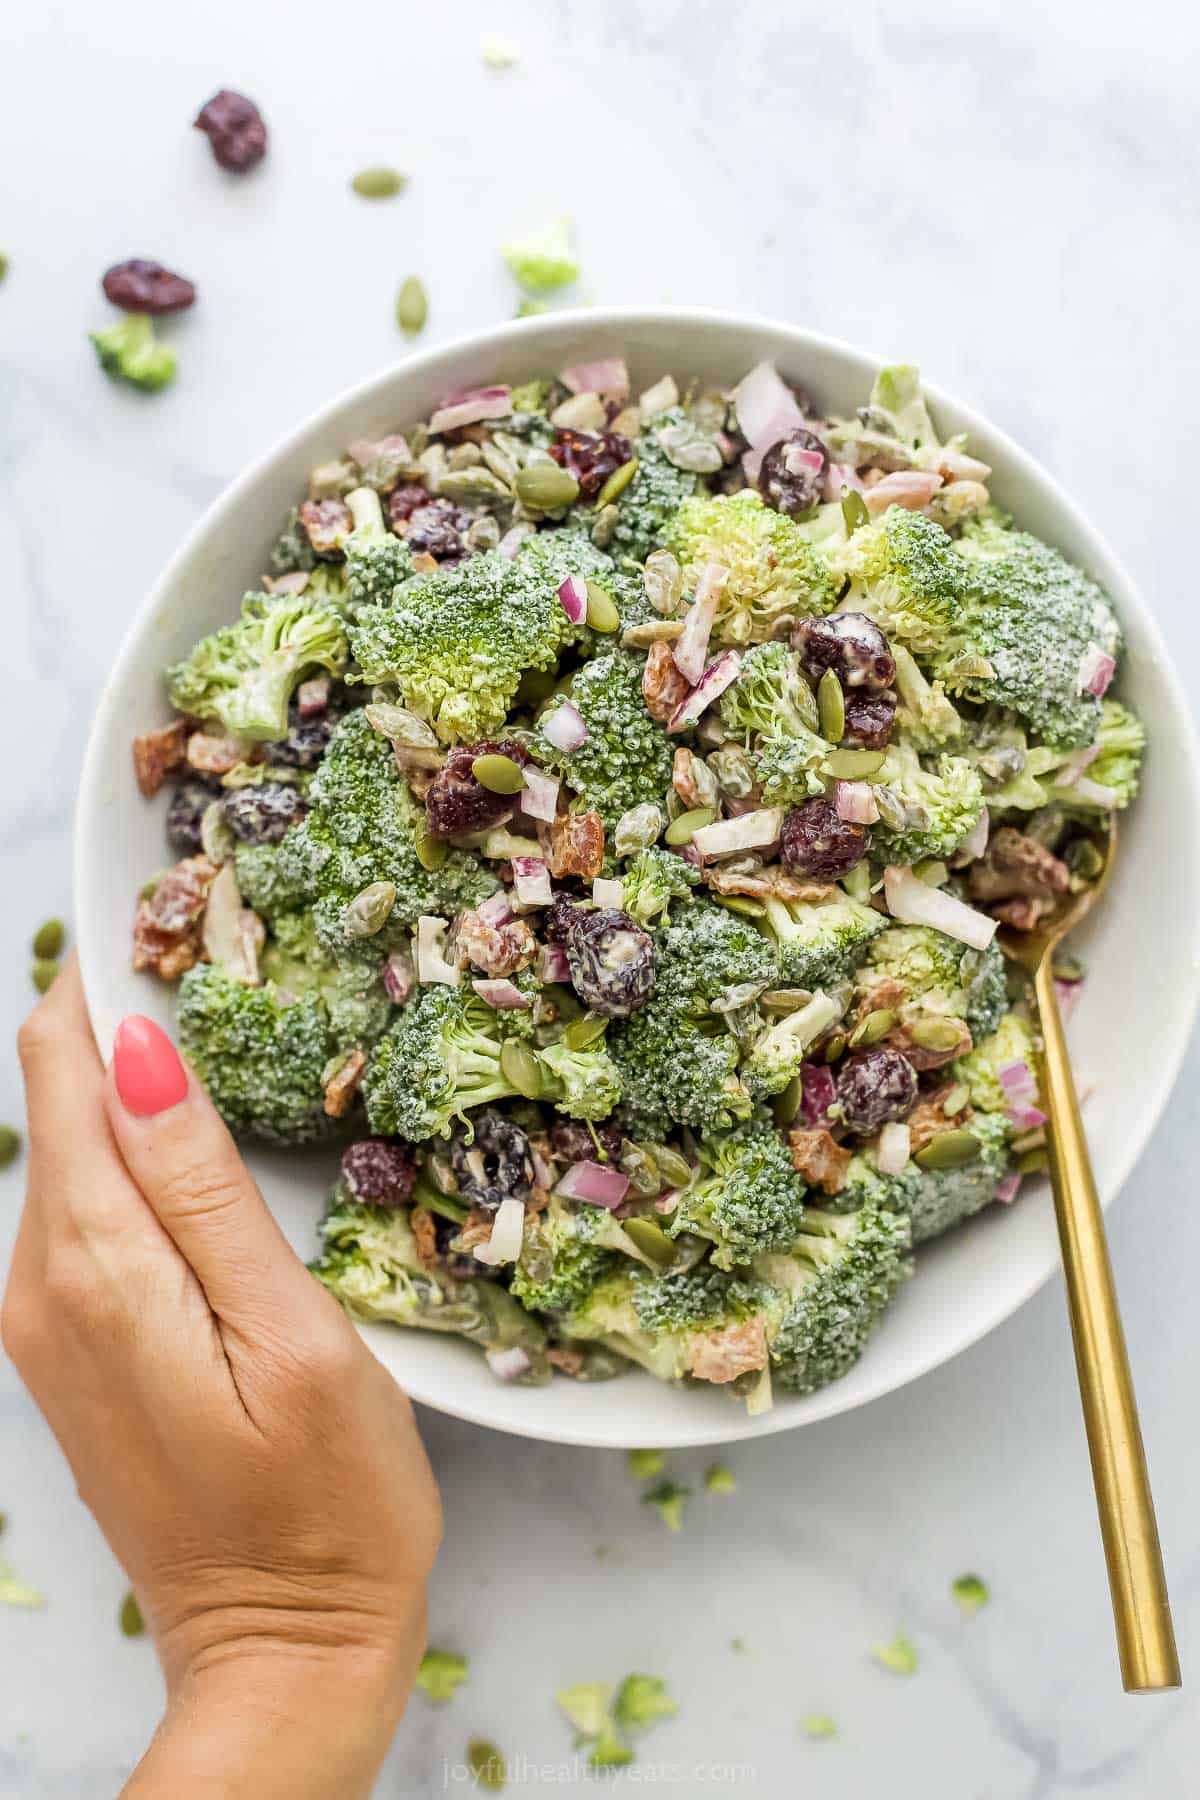 A hand holding a big bowl of broccoli salad with a gold-colored spoon inside